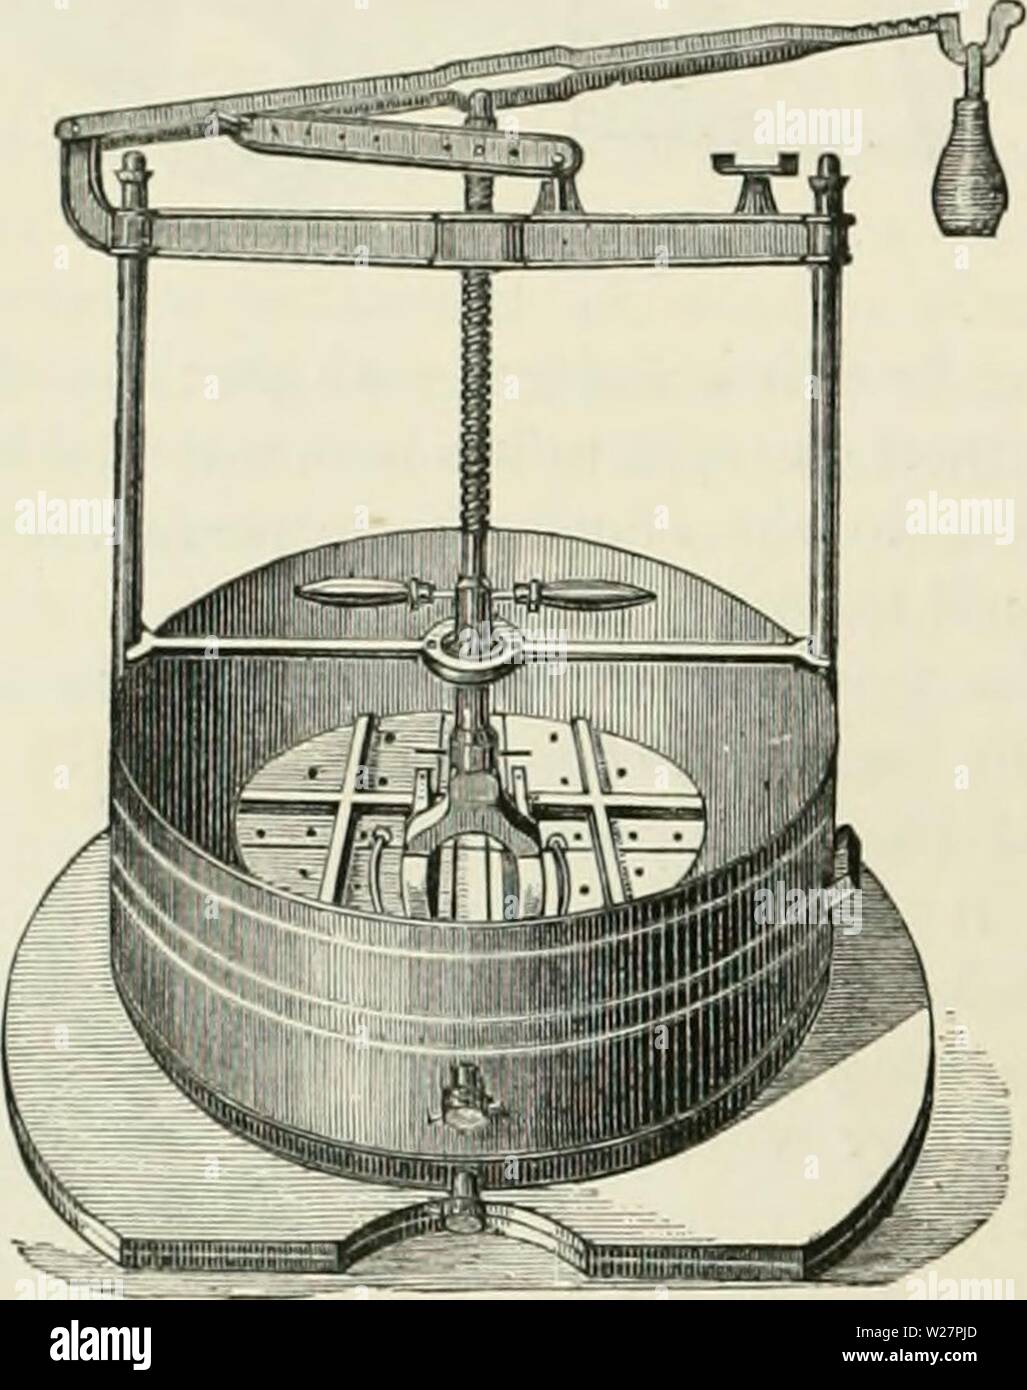 Archive image from page 305 of Dairy farming  being the. Dairy farming : being the theory, practice, and methods of dairying  dairyfarmingbein00shel Year: 1880  236 DAIRY FARMING. per diem are made, it is also used for all the suliso- quent pressinjj to wliieh the cheeses are suhjected. In large dairies, however, a larg'er lever-press, that is compound in action (Fi&lt;?. 119), is used for the later statjes of pressing. It is a very strong im- plement, exceedingly simple and easy to work, and thoroughly cflicient in all respects. Having two fixed upright bars on either side, the cheeses are al Stock Photo